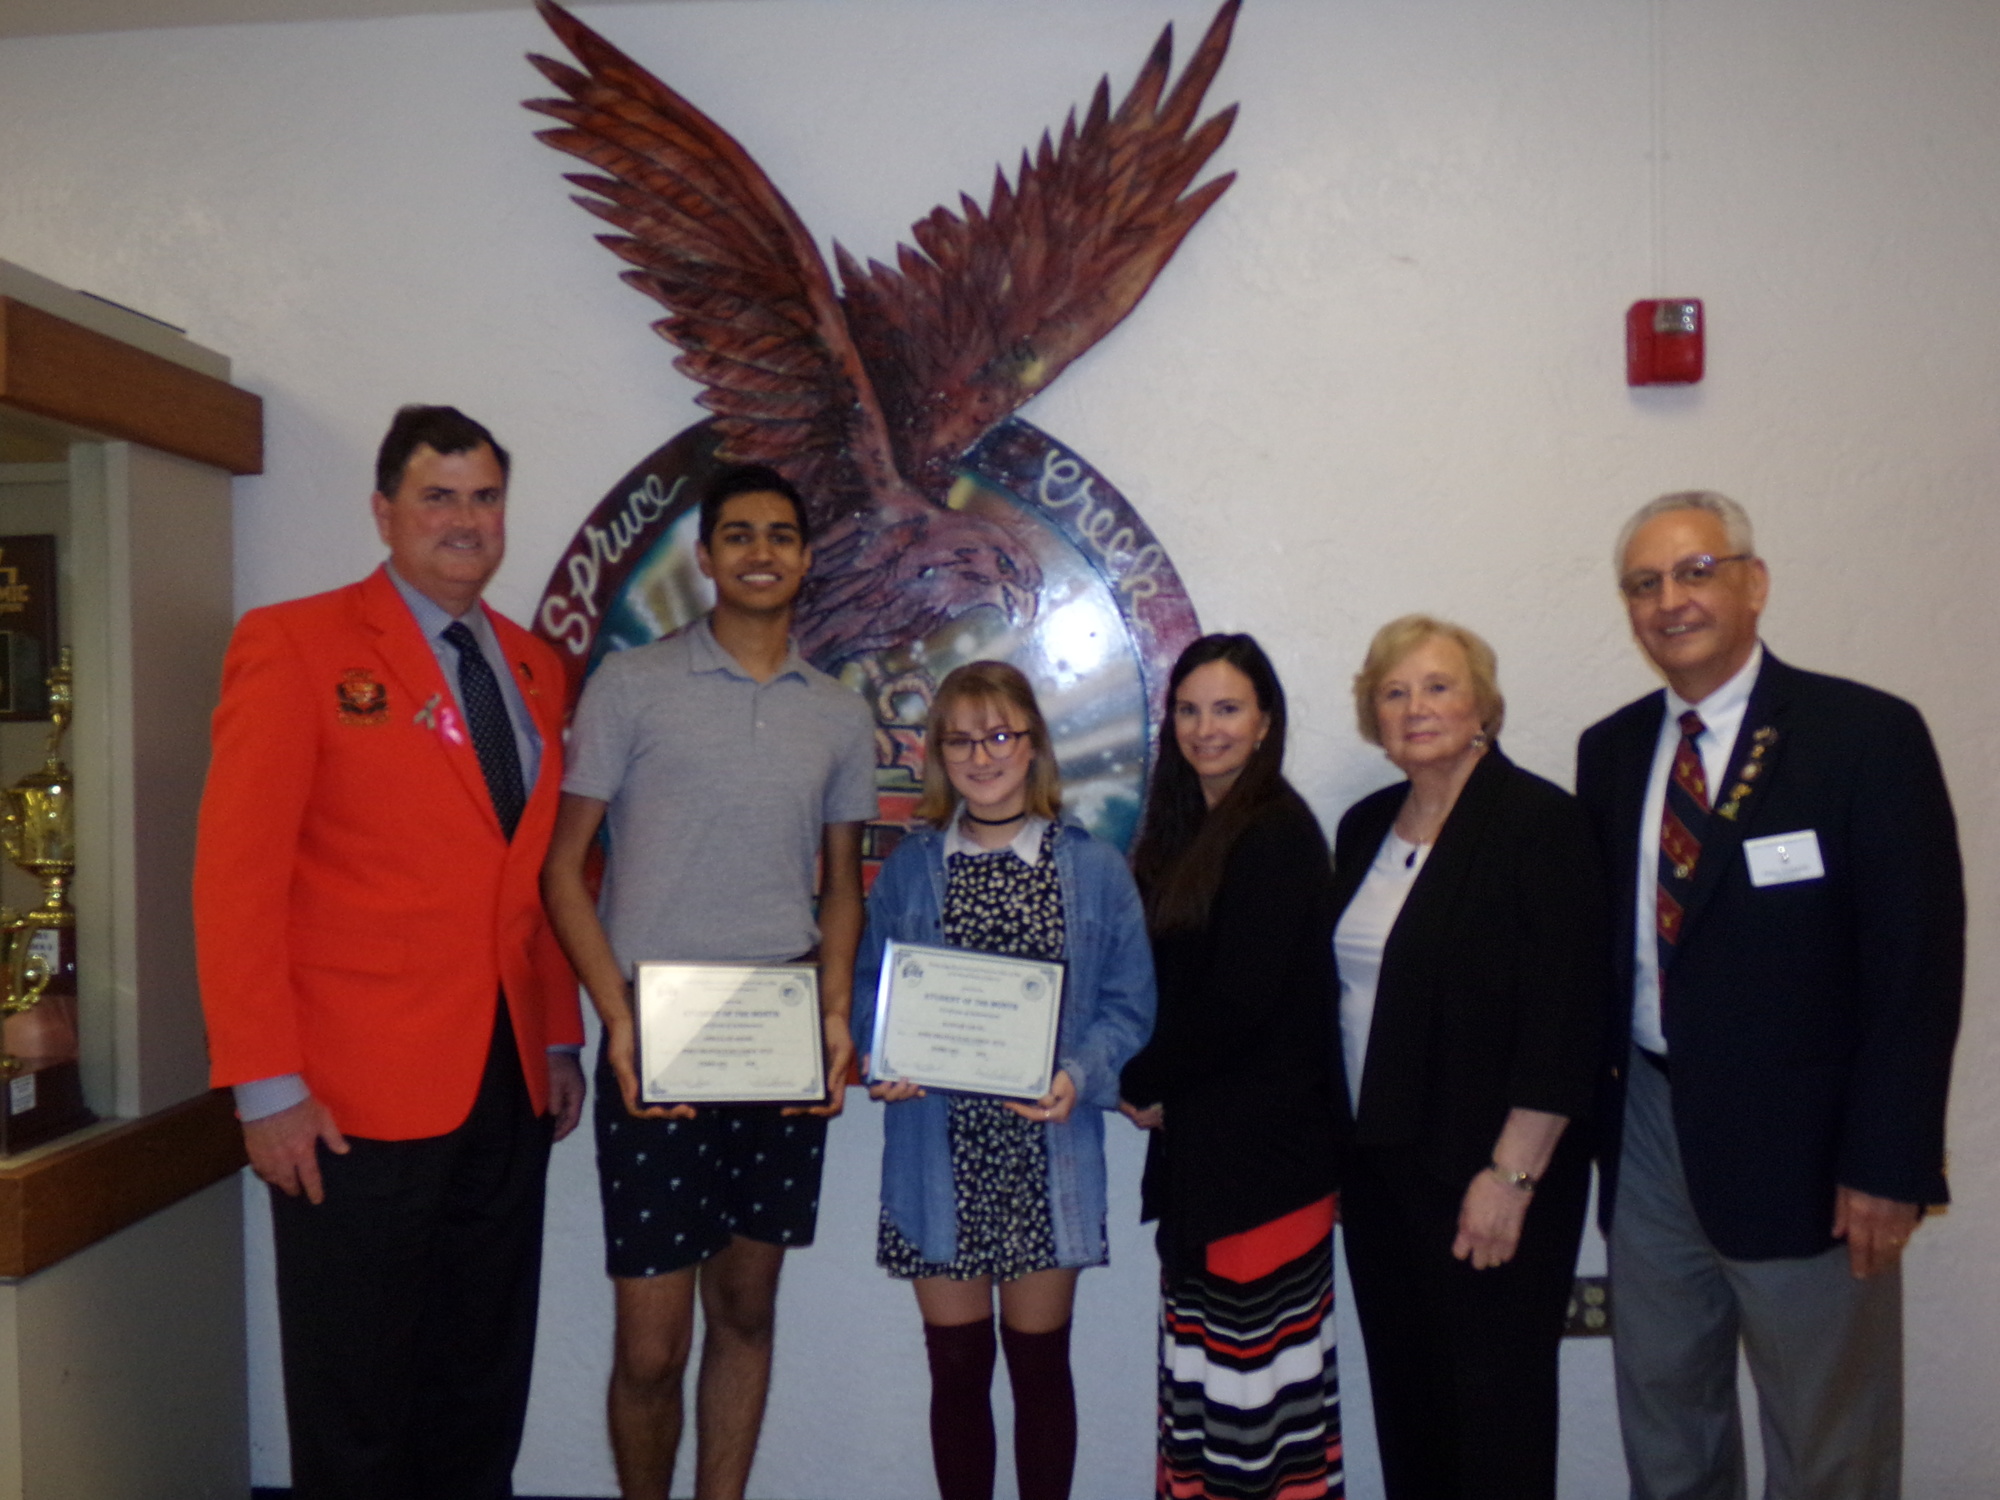 Principal Todd Sparger, Abdullah Afridi, Hannah Young, Louise Lauthain, Guidance Counselor Carrie Cappiello and Paul Leonard. Photo courtesy of the Elks Lodge